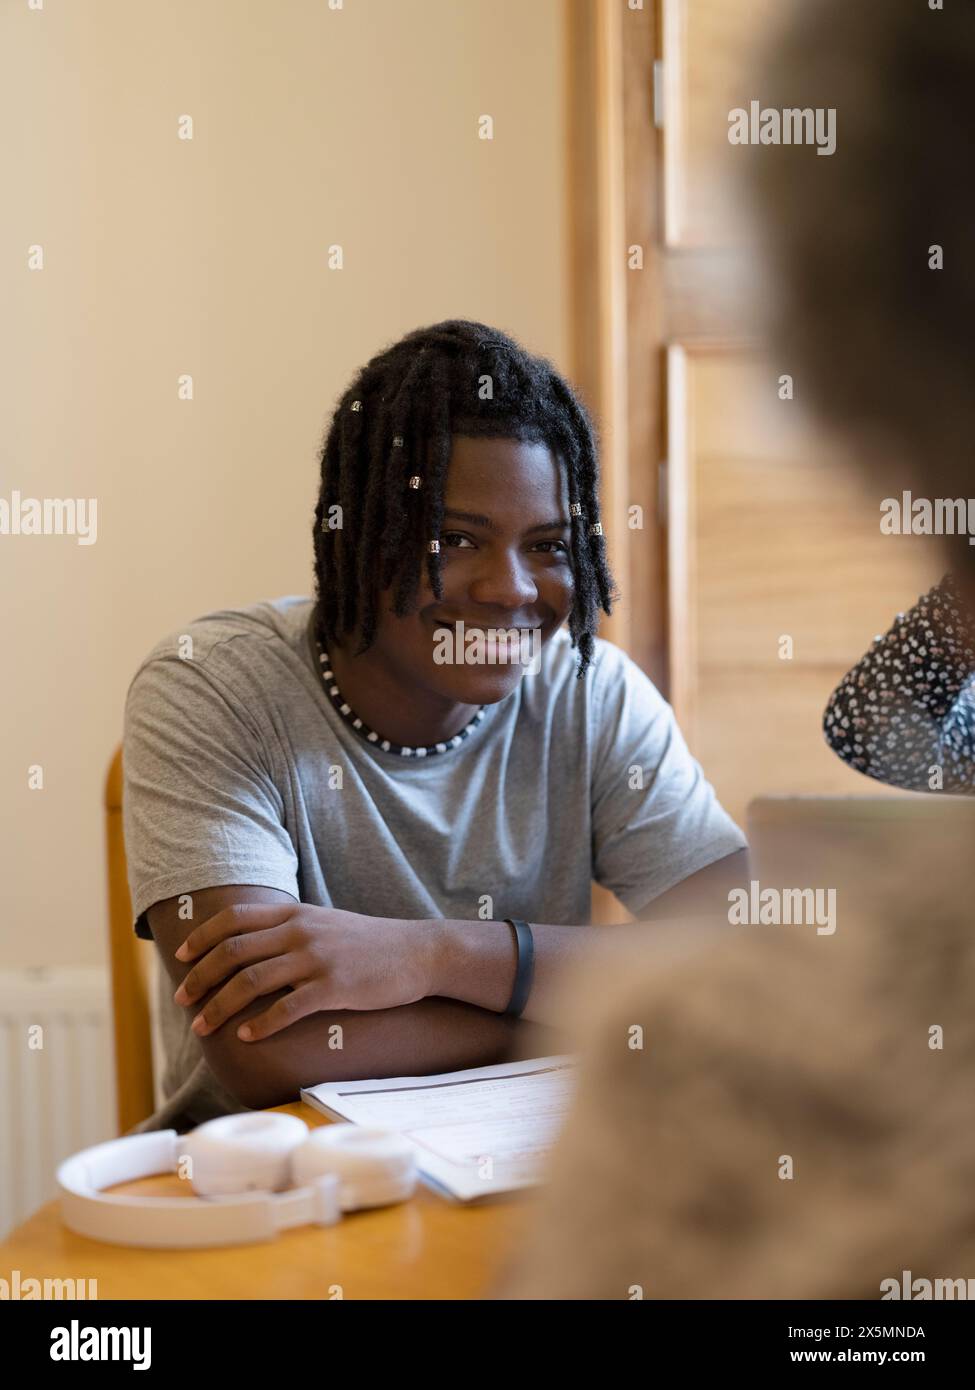 Smiling teenage boy sitting at table at home Stock Photo